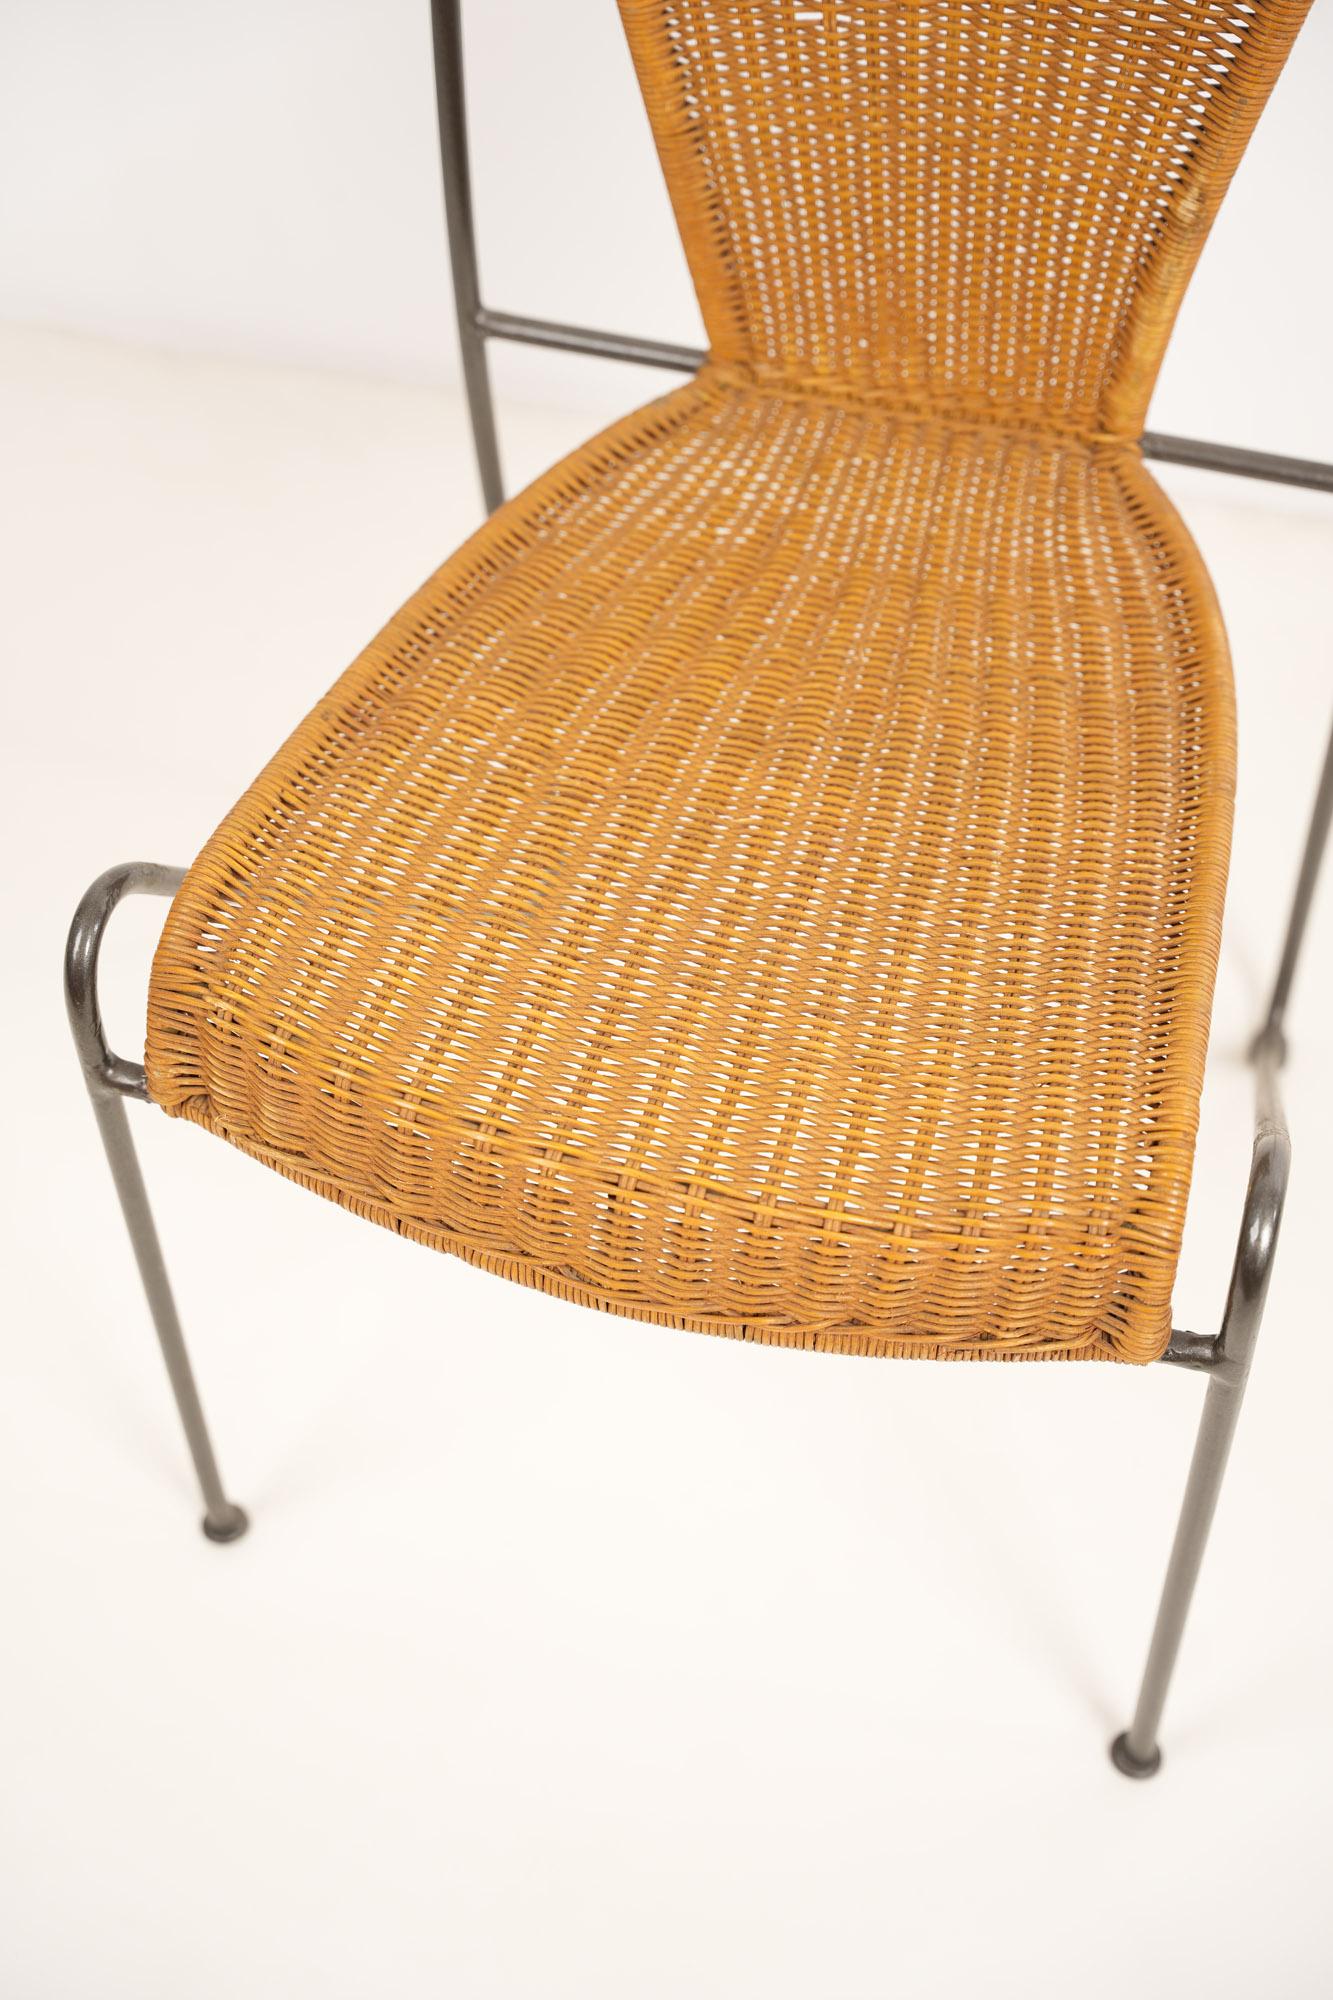 American Wicker and Iron Chair By Frederic Weinberg 1950s For Sale